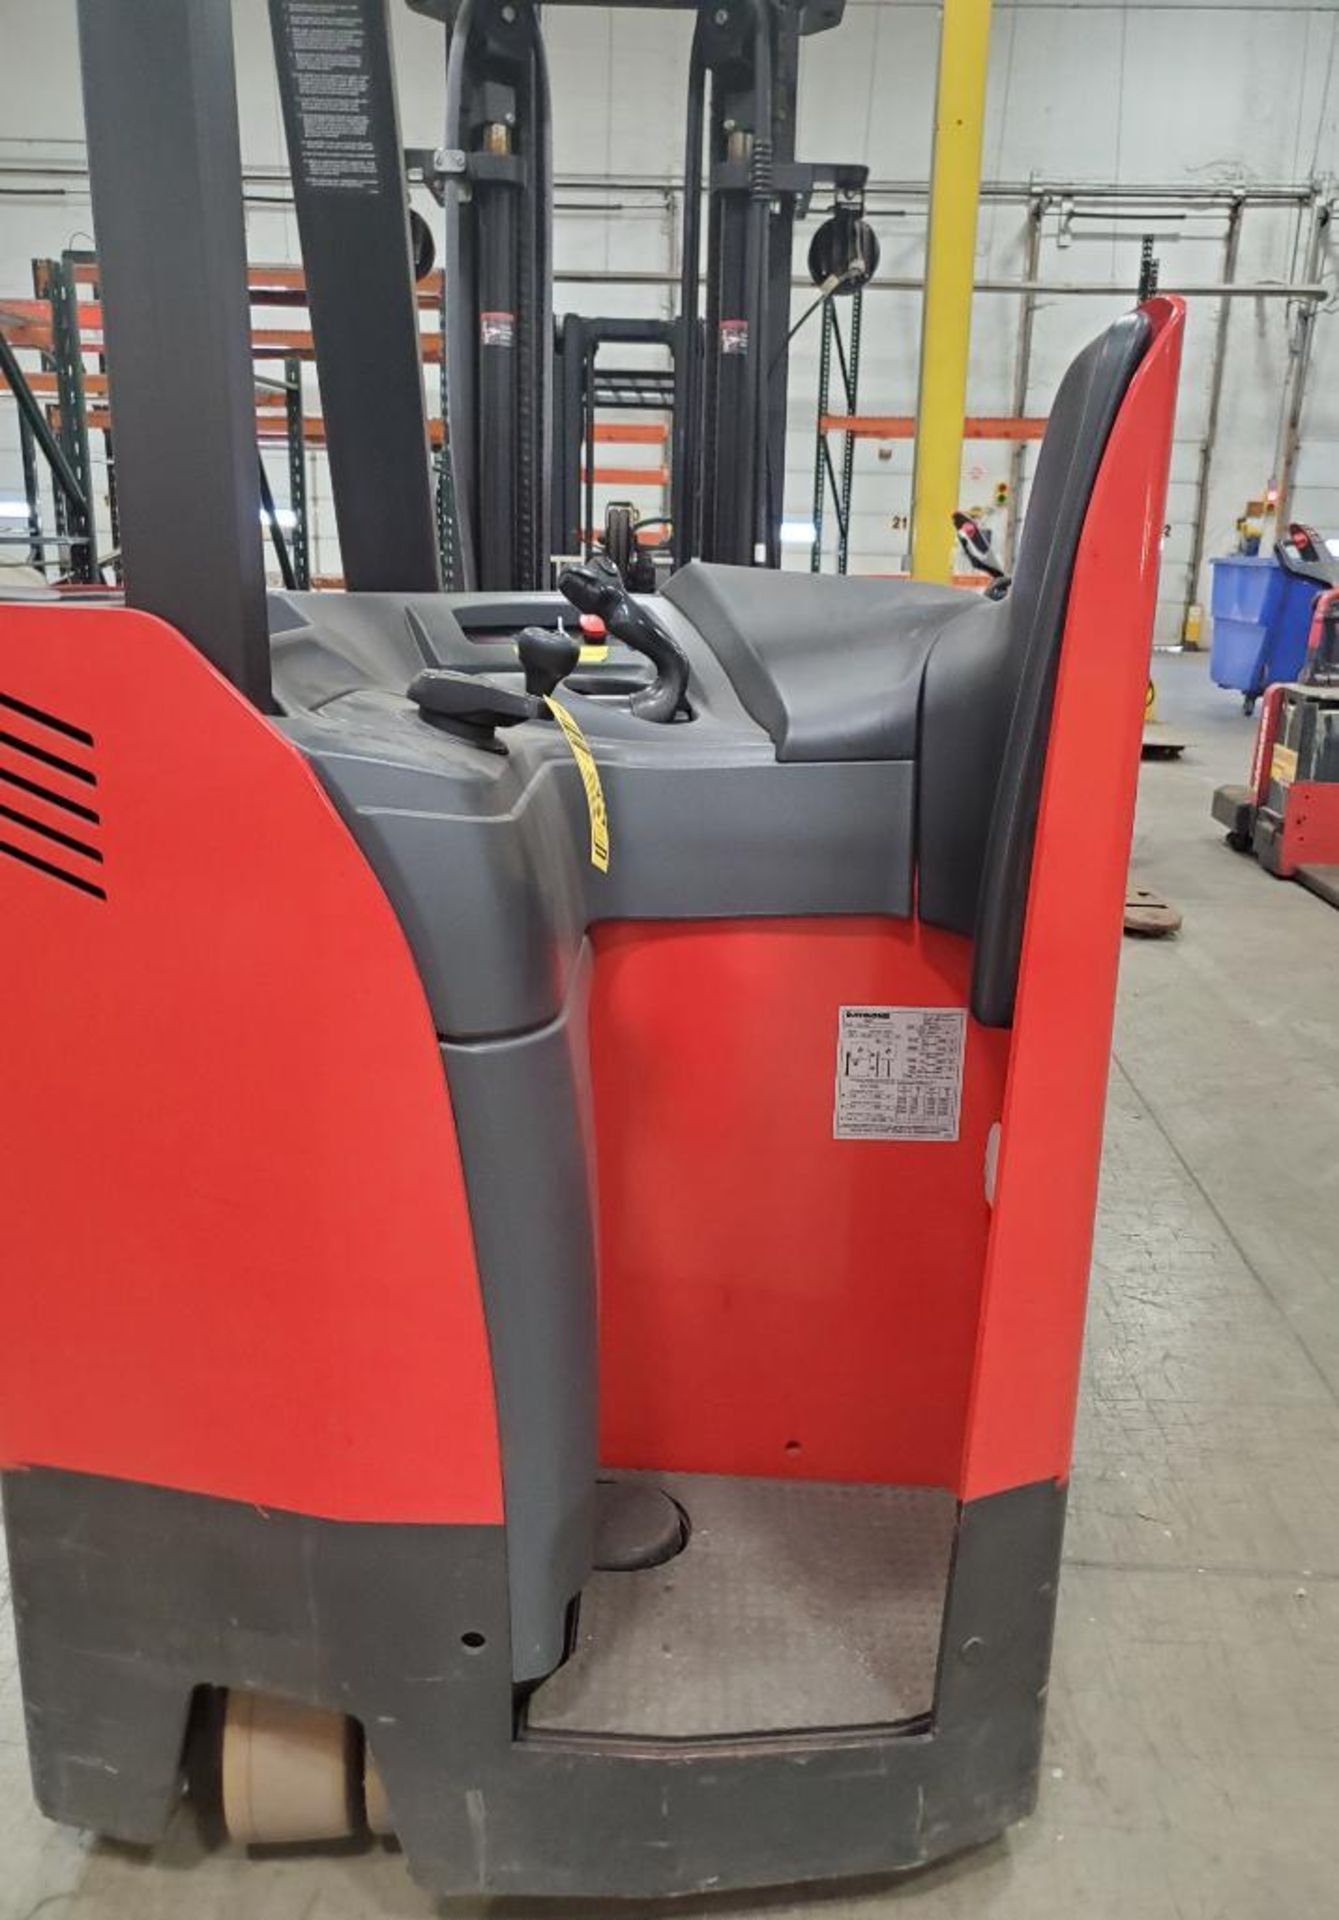 2014 RAYMOND ORDER PICKER; MODEL 415-C35TT, S/N 415-14-44015, WITH IWAREHOUSE MONITOR ATTACHMENT - Image 6 of 7